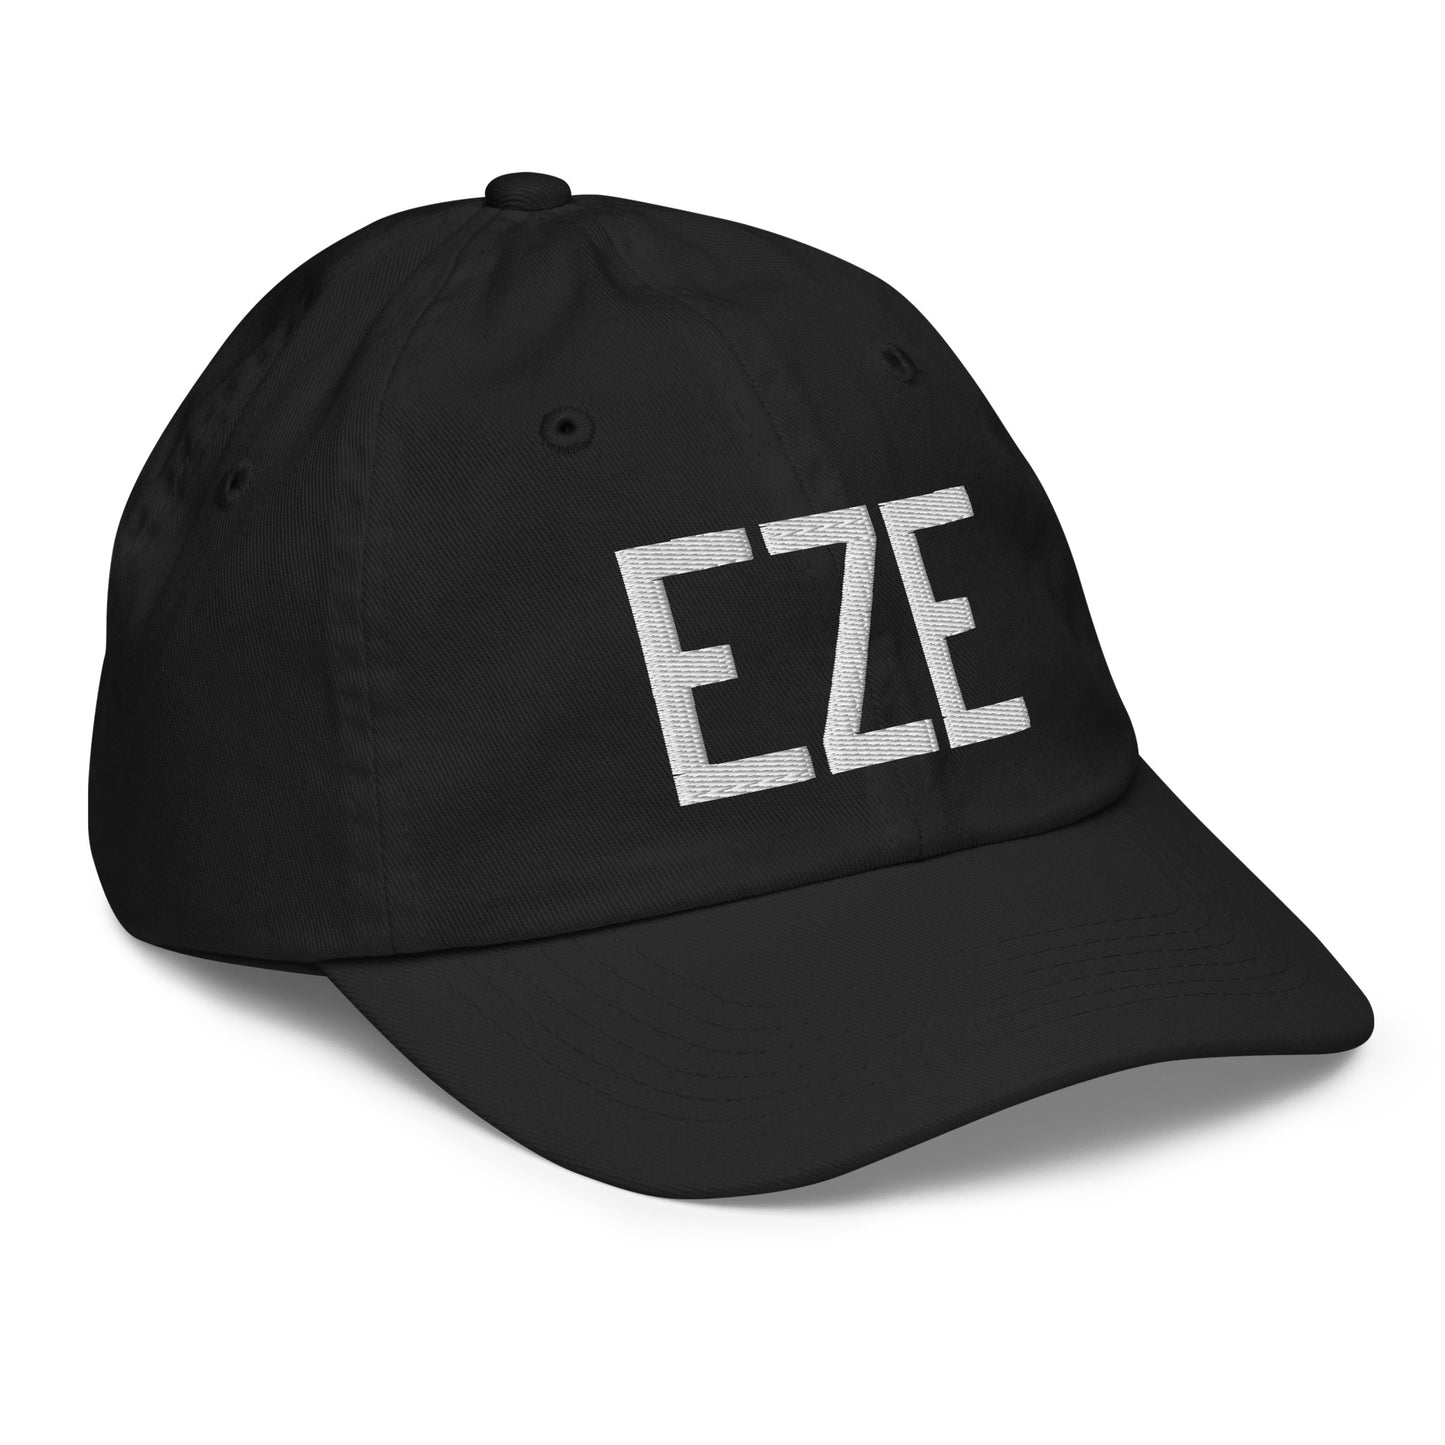 Airport Code Kid's Baseball Cap - White • EZE Buenos Aires • YHM Designs - Image 12